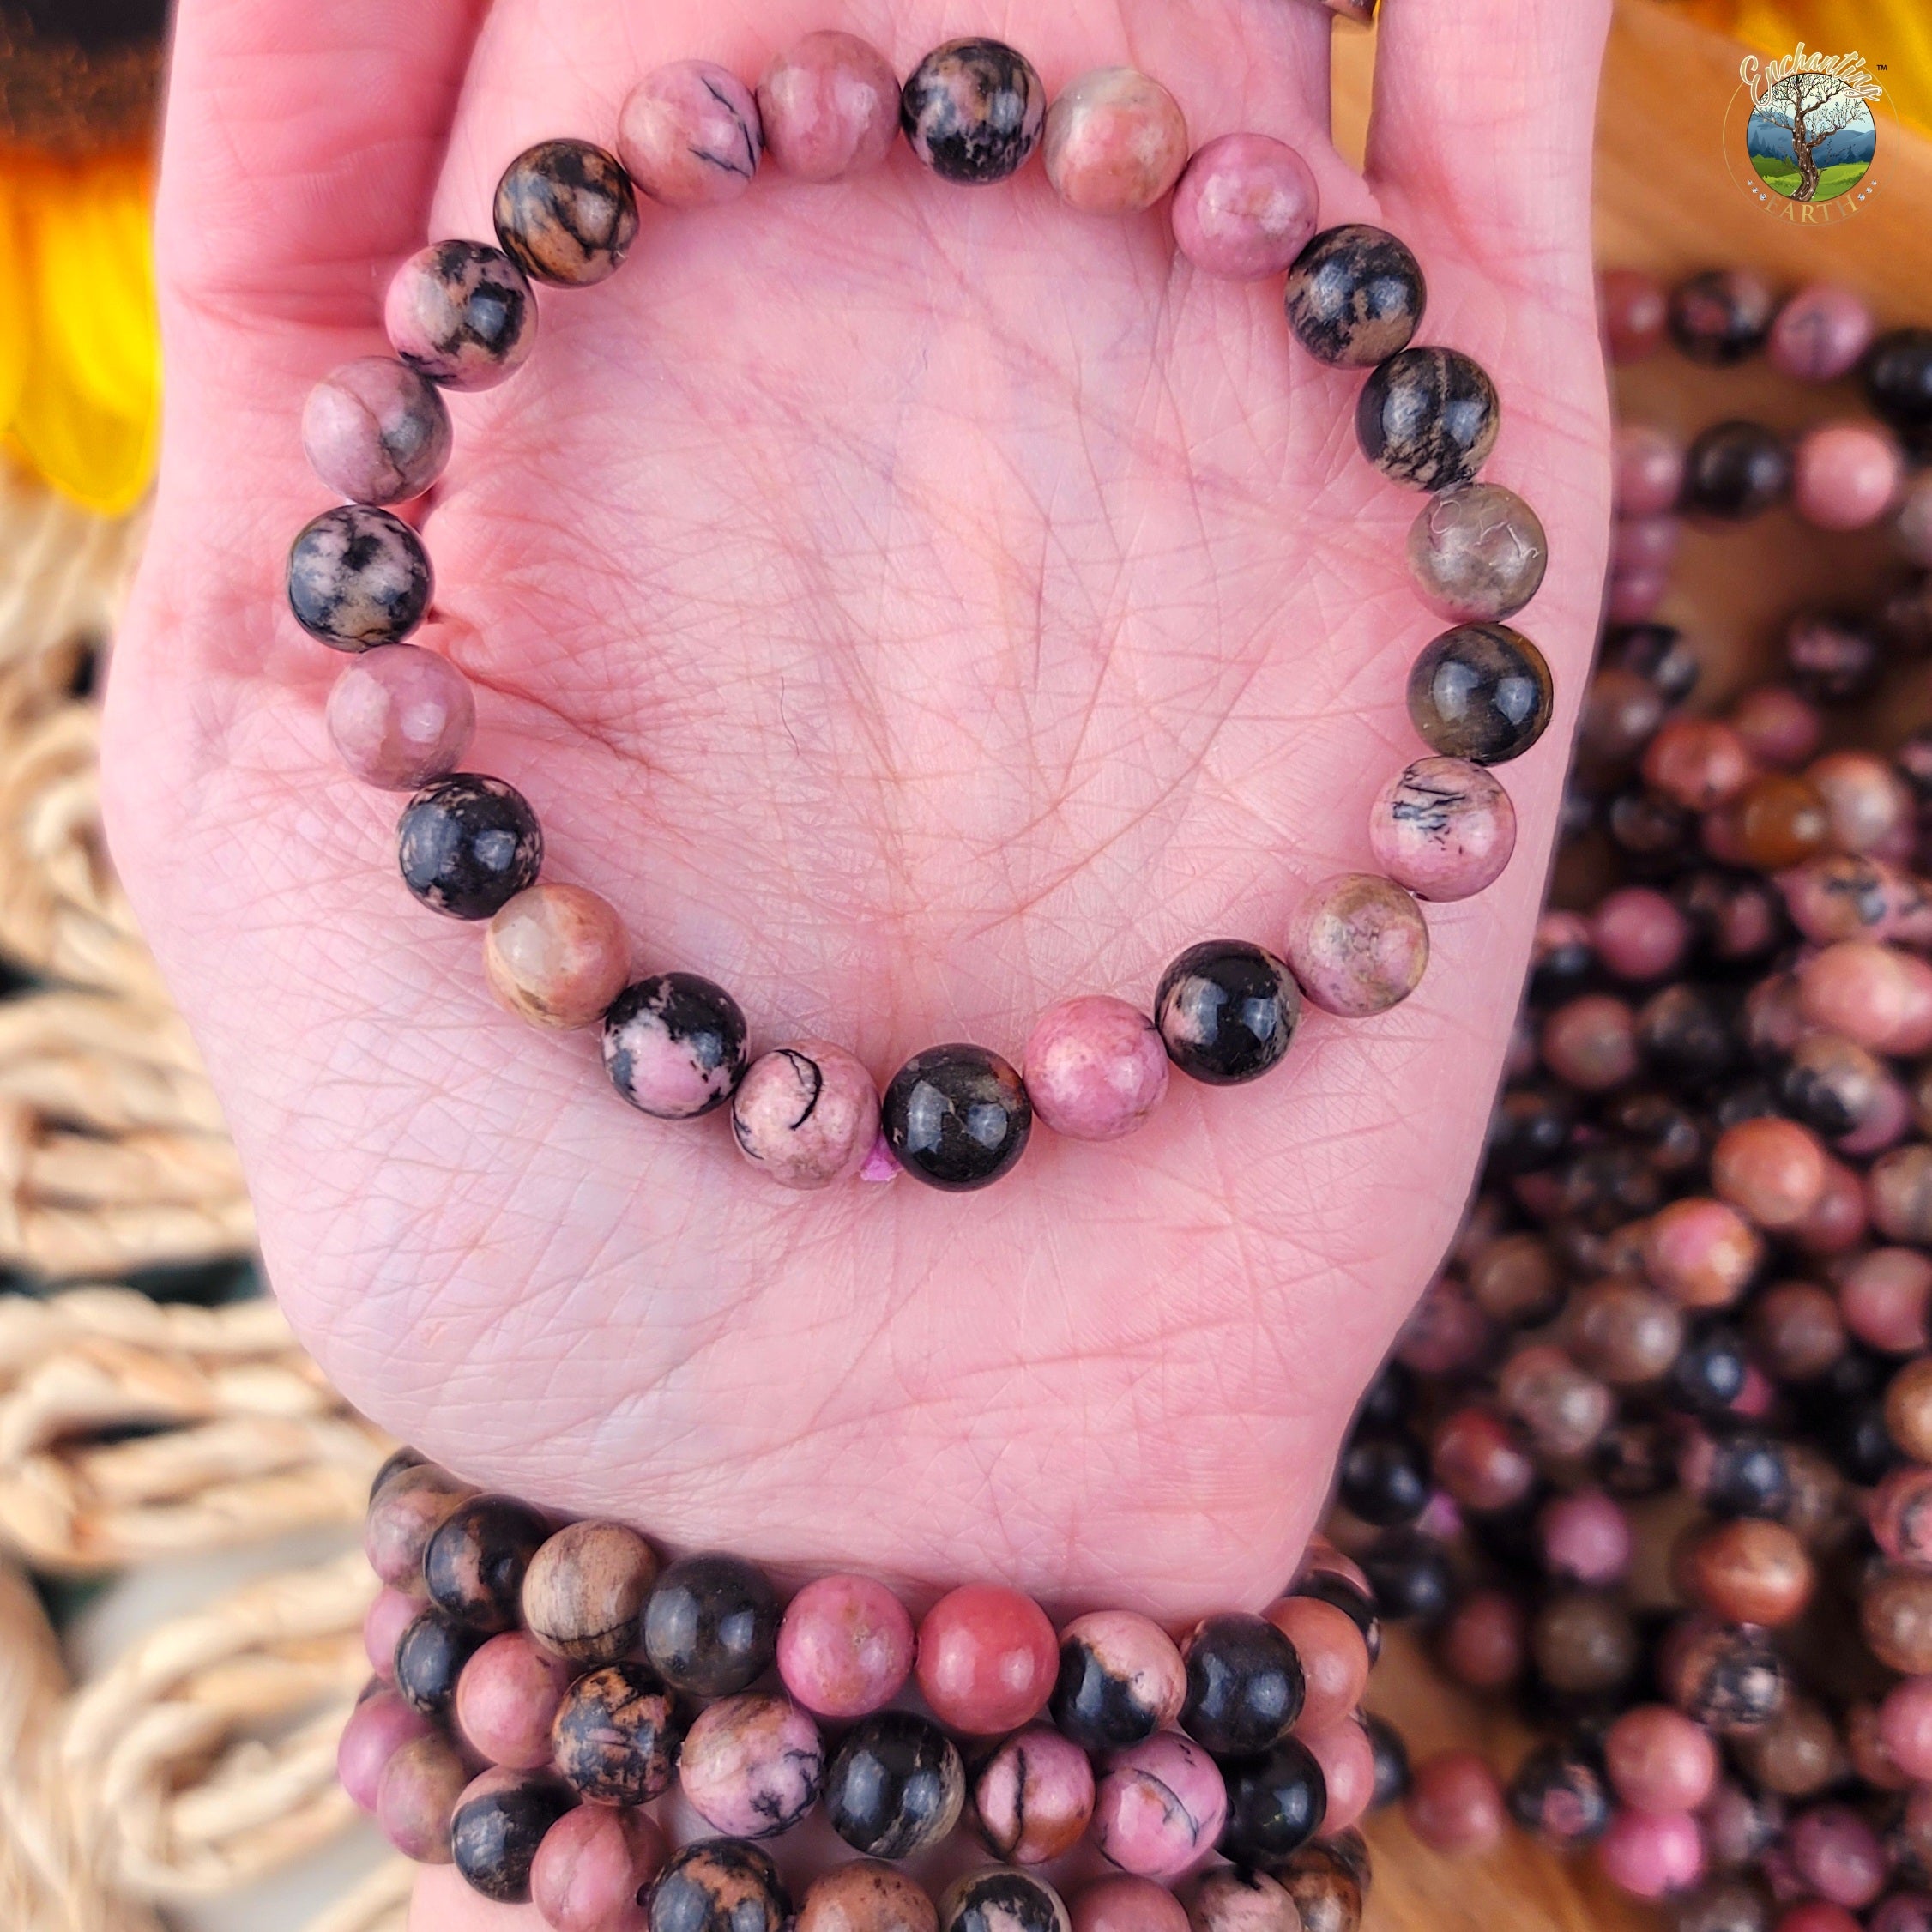 Dendritic Rhodonite Bracelet for Attraction, Love and Self Worth